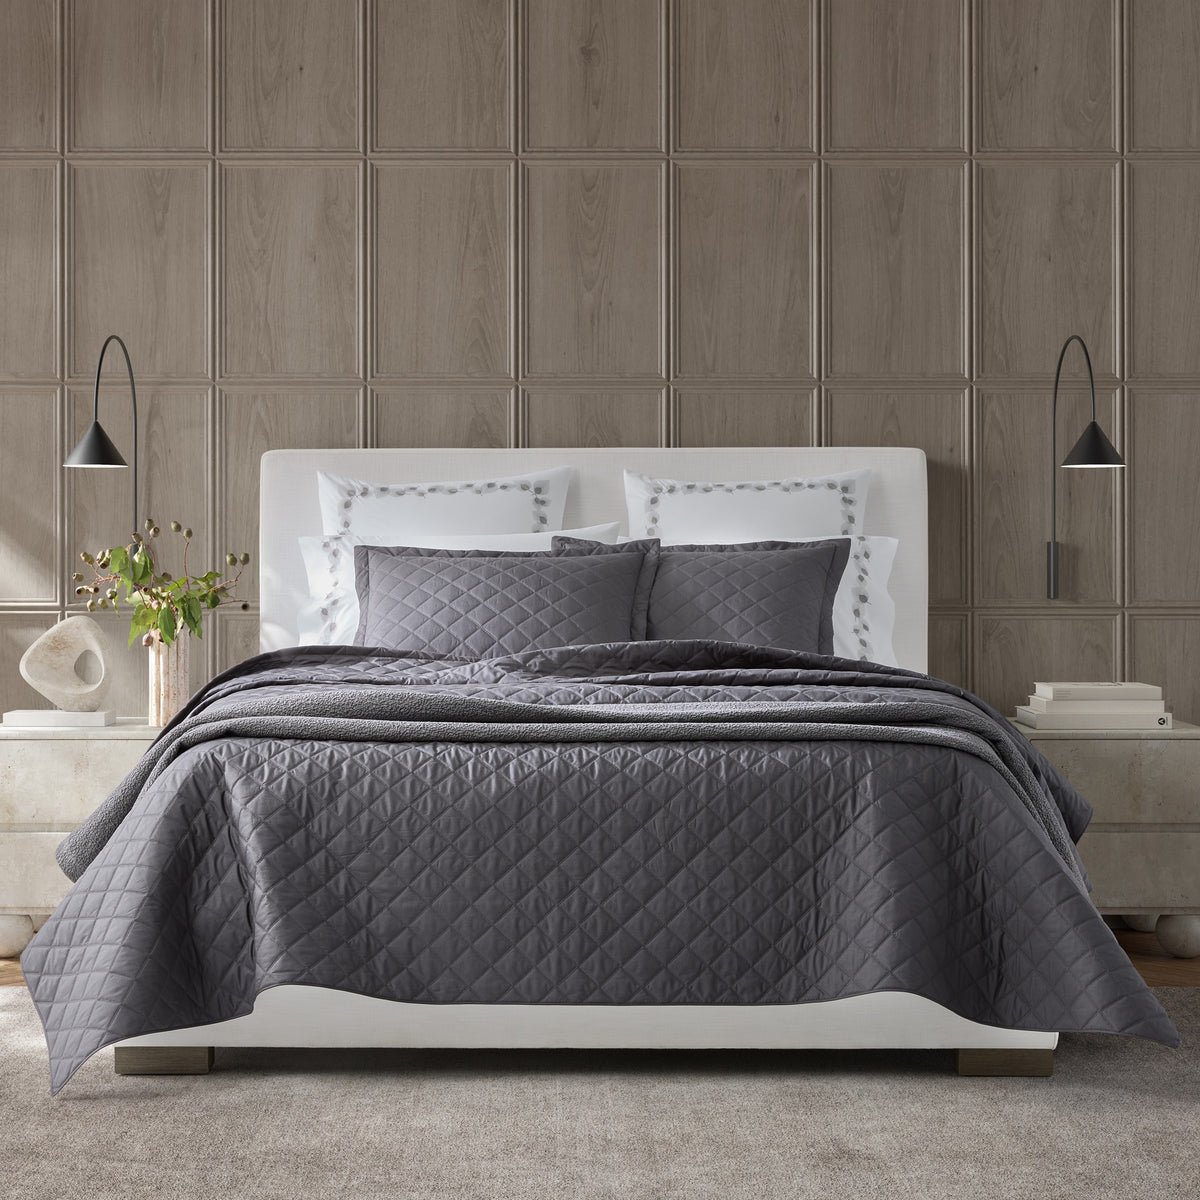 Bed Dressed in Matouk Milano Quilt Bedding in Color Carbon